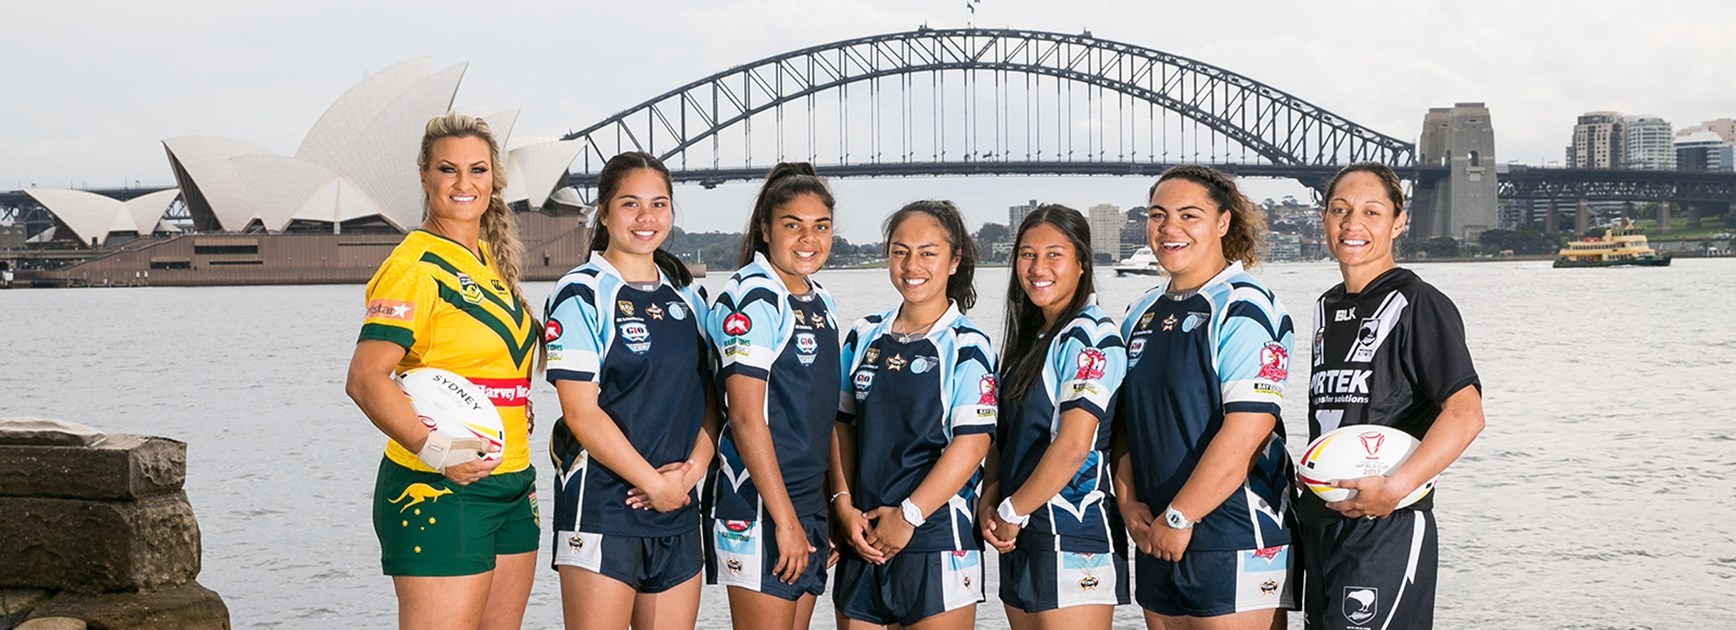 Sydney will host the 2017 Women's Rugby League World Cup.